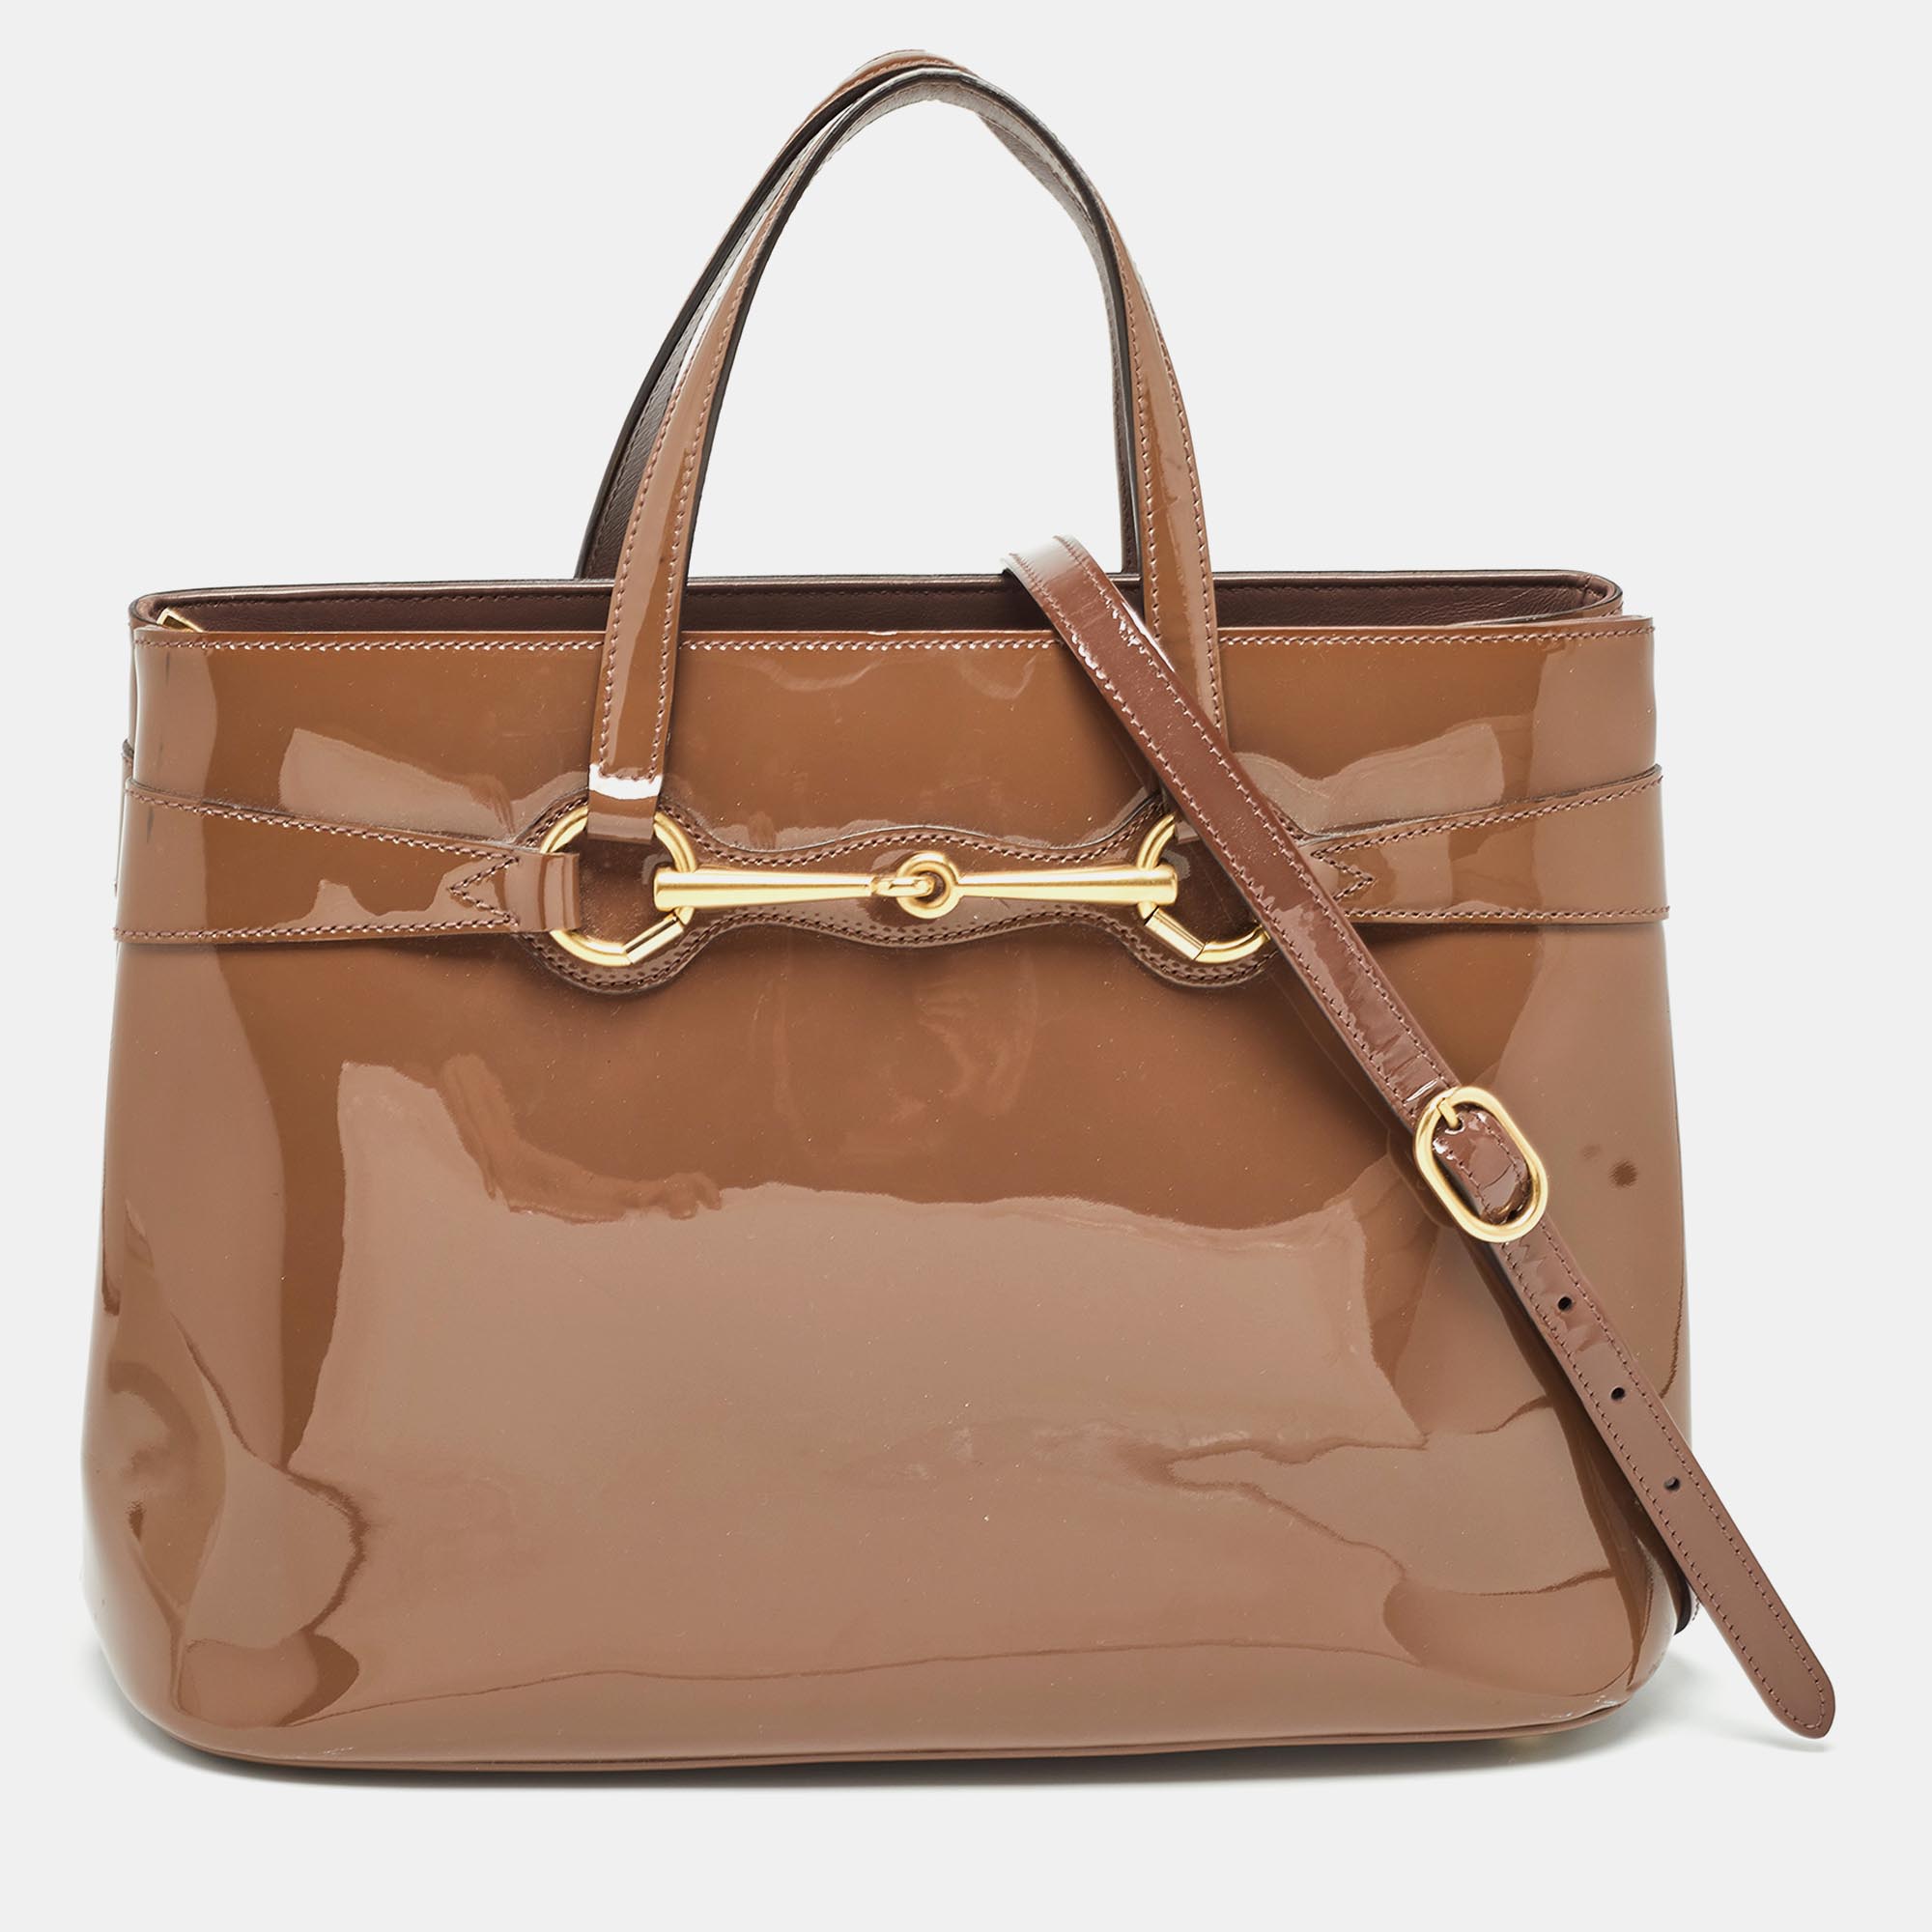 Pre-owned Gucci Brown Patent Leather Horsebit Tote